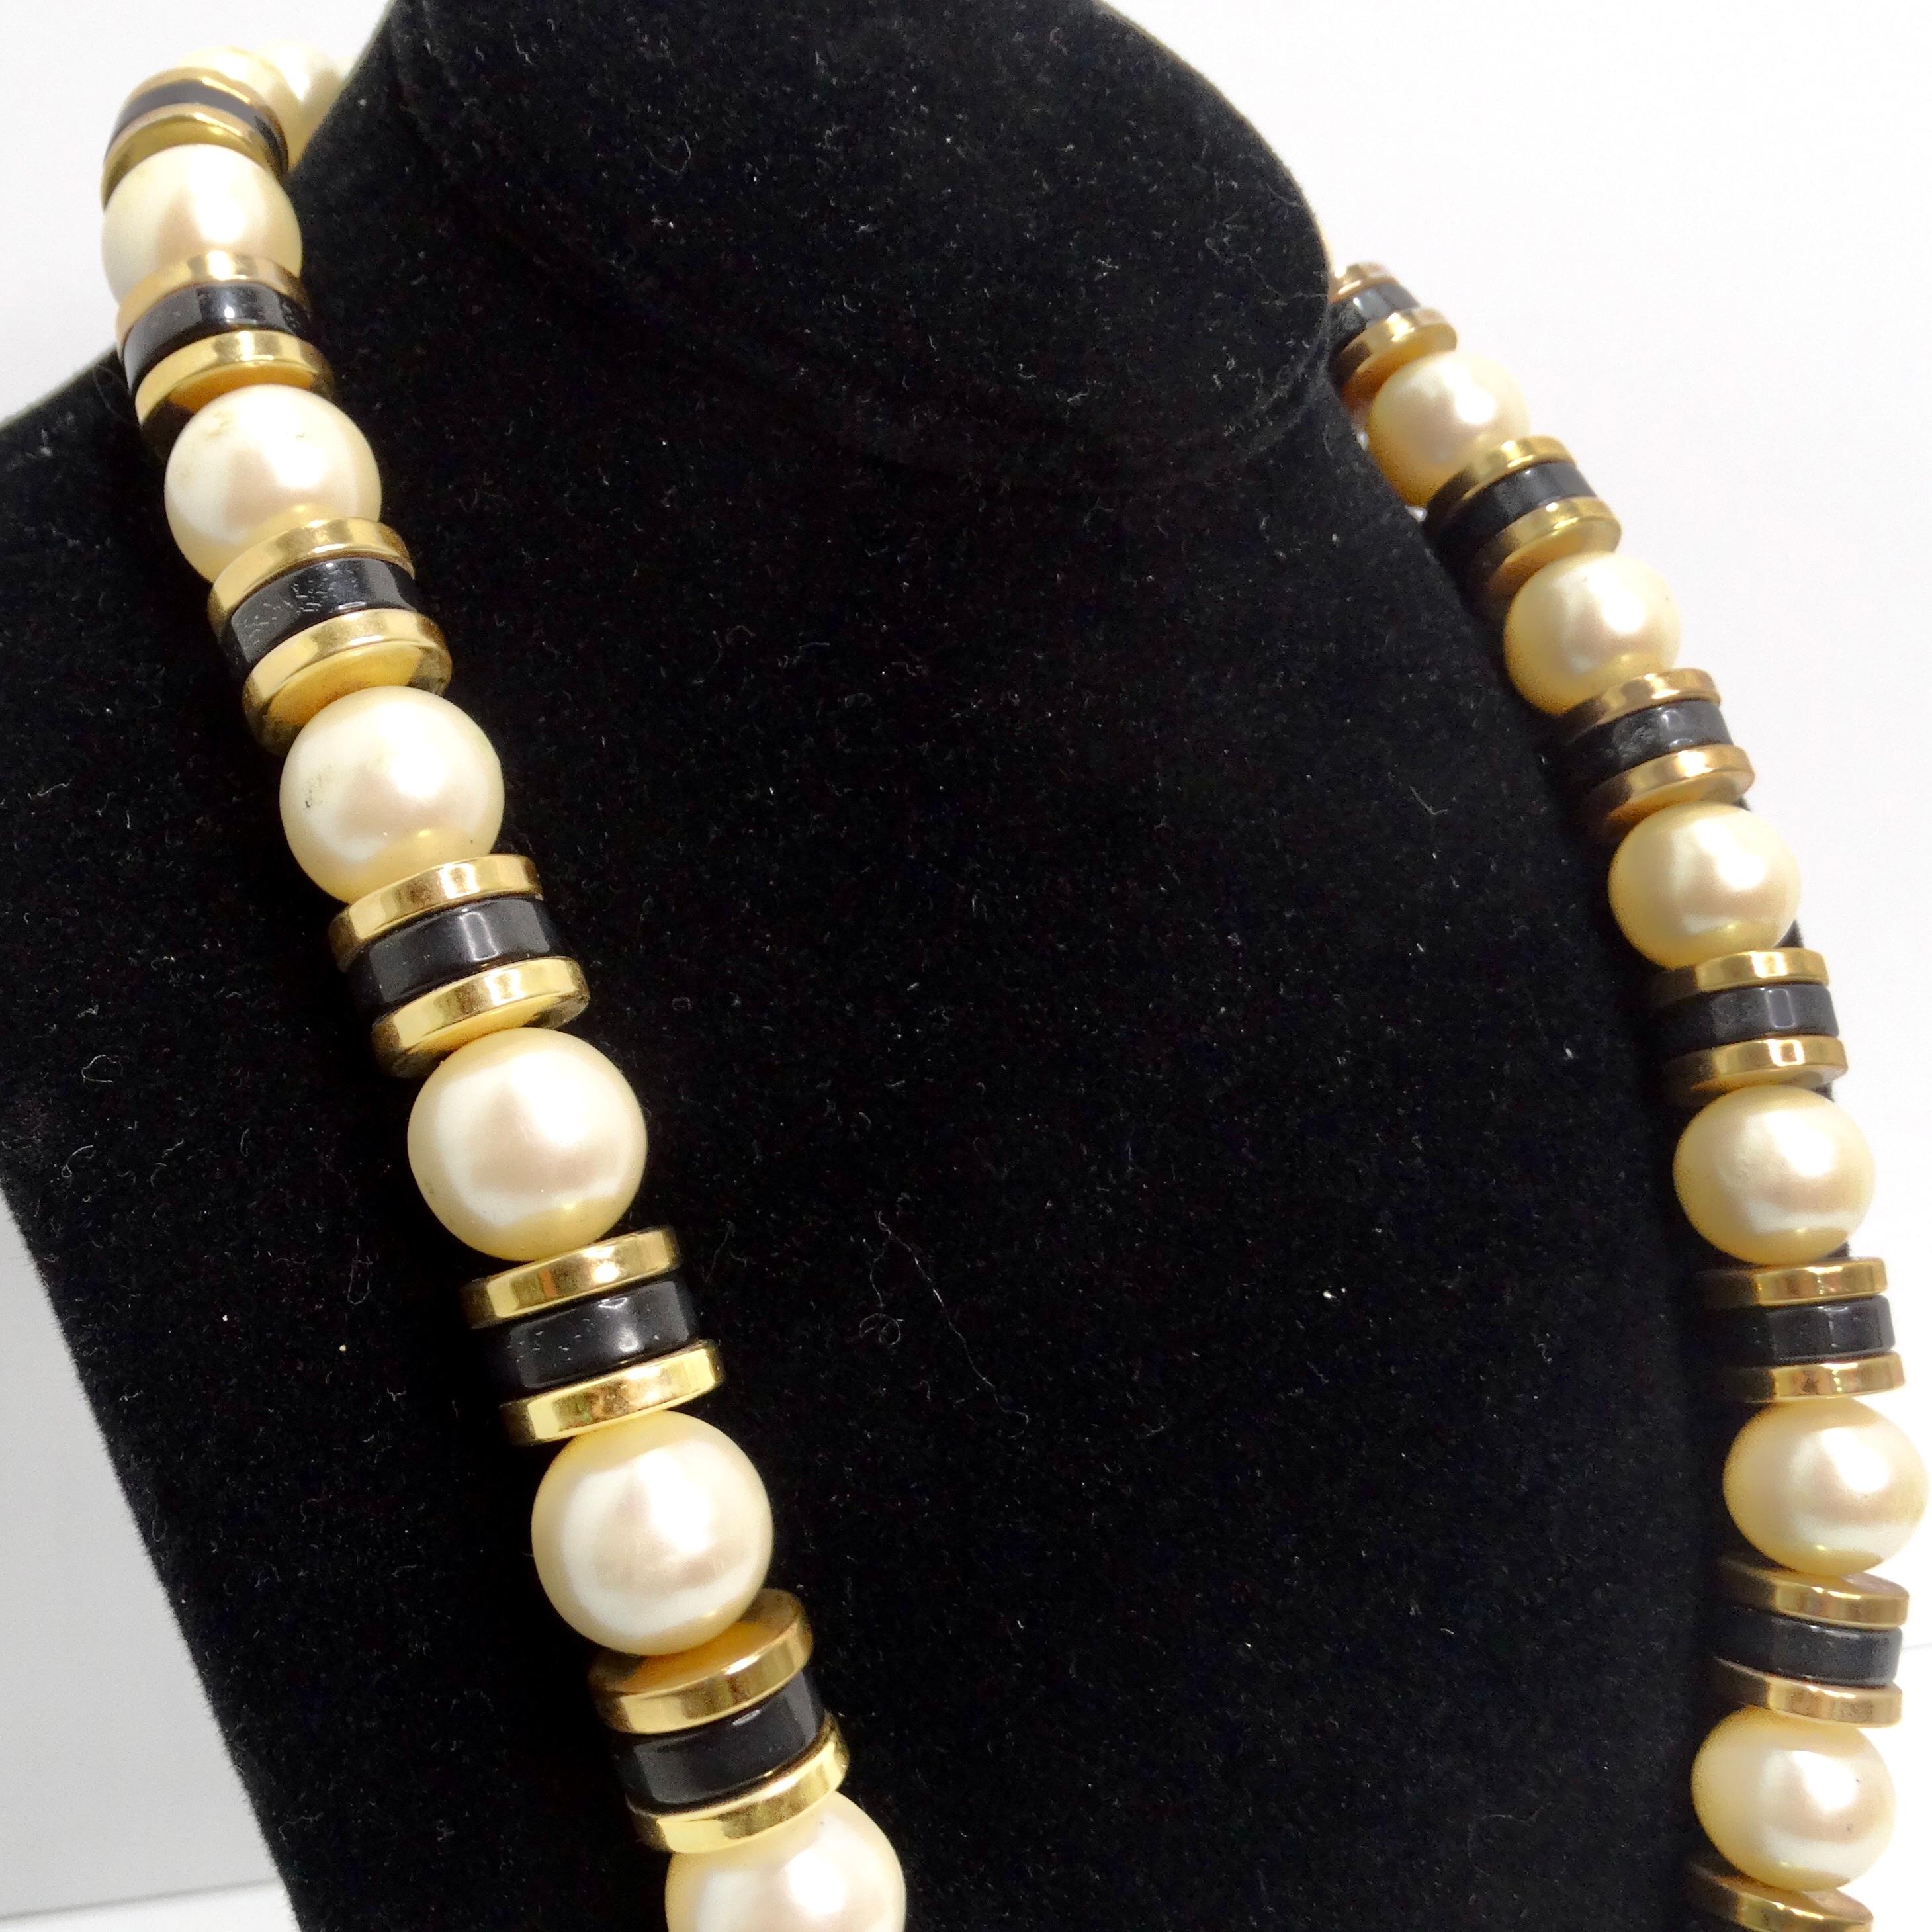 1970s Synthetic Pearl Beaded Necklace In Excellent Condition For Sale In Scottsdale, AZ